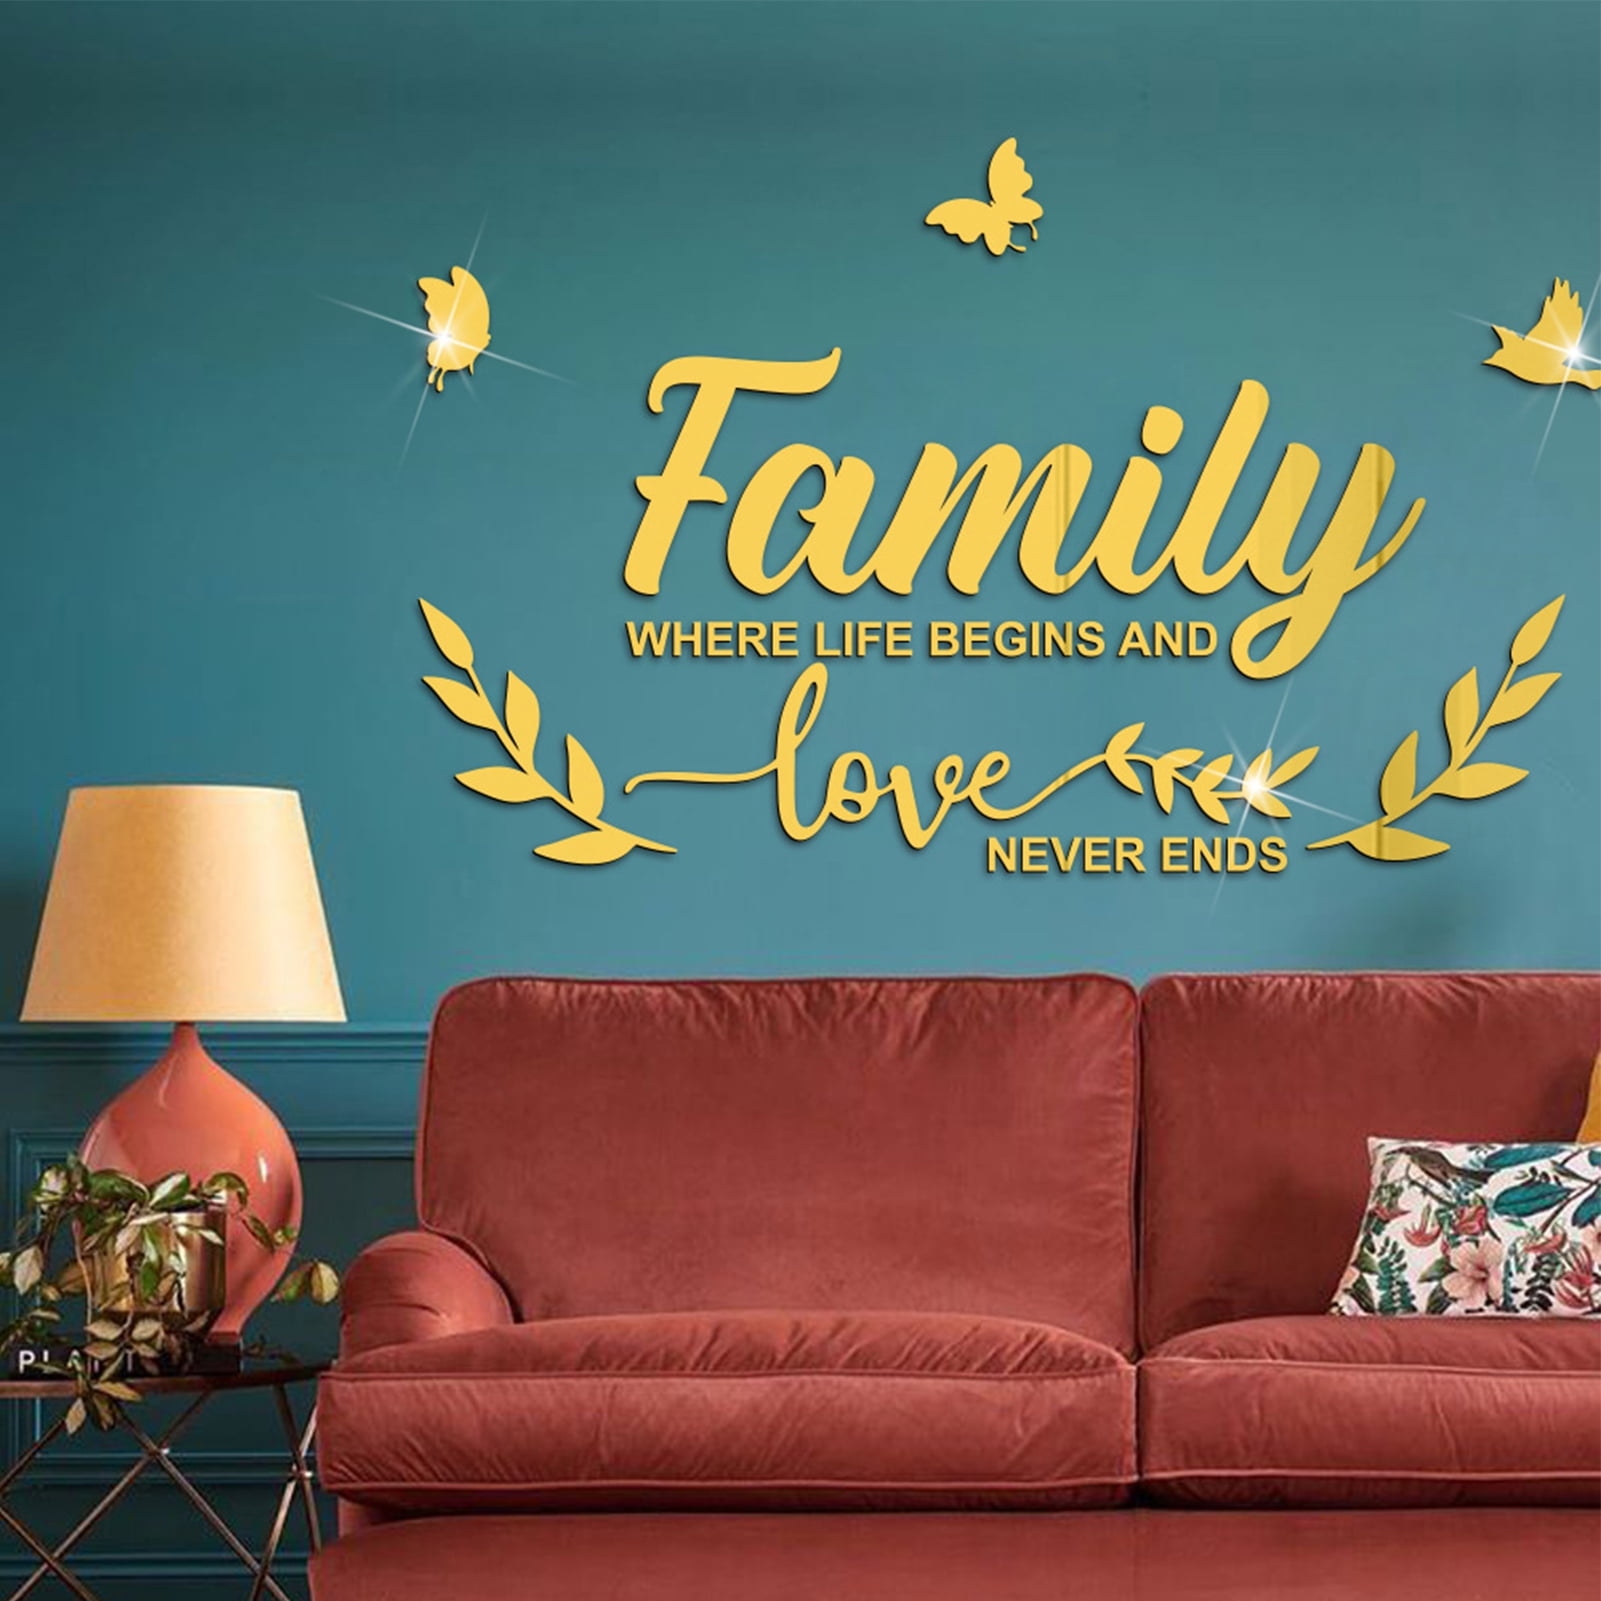 Details about   Love Quotes Wall Sticker Removable Decals Vinyl Art Living Room Decor 